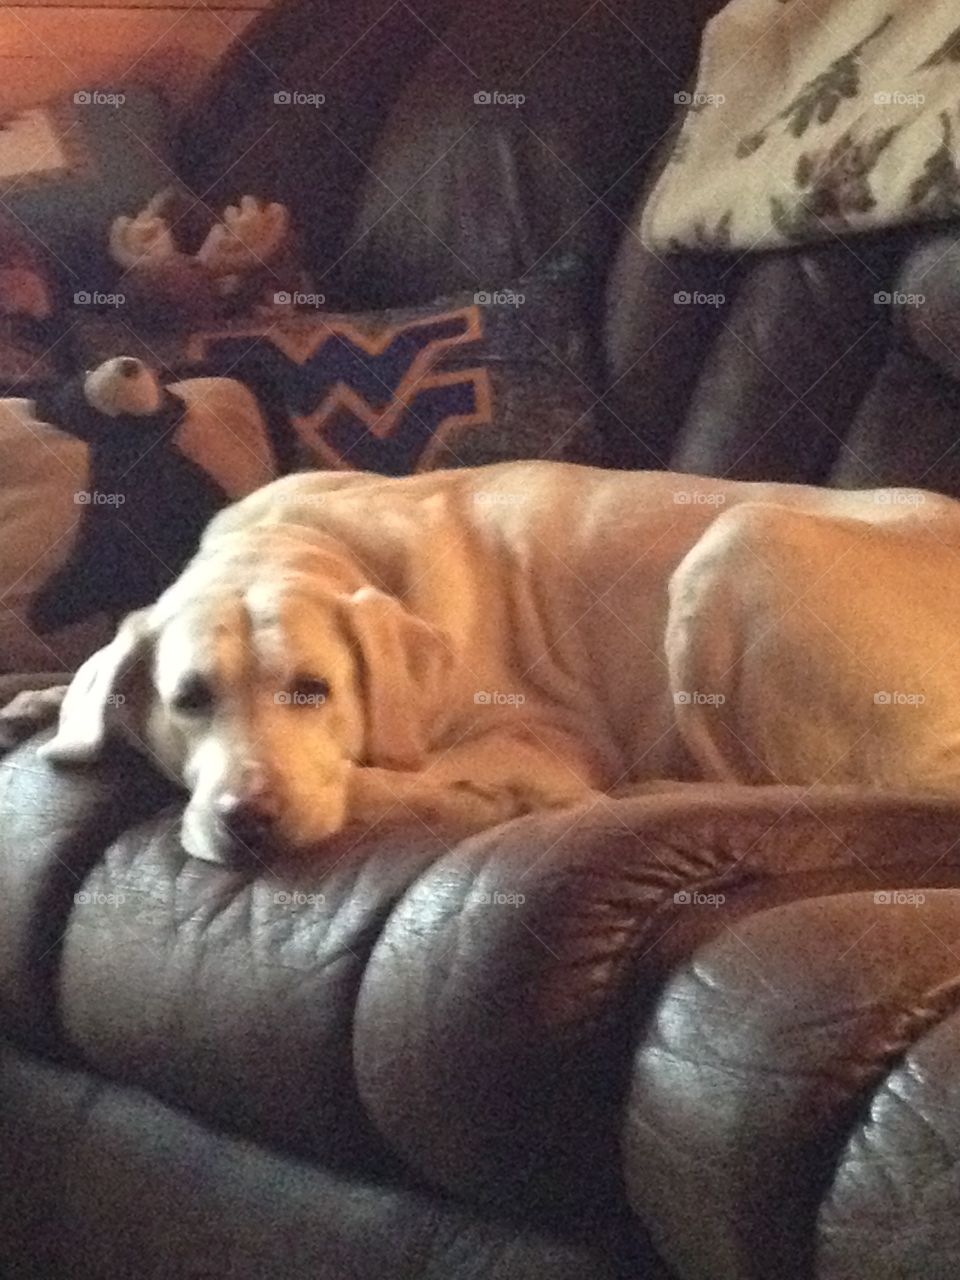 Yellow lab wv pillow on couch


